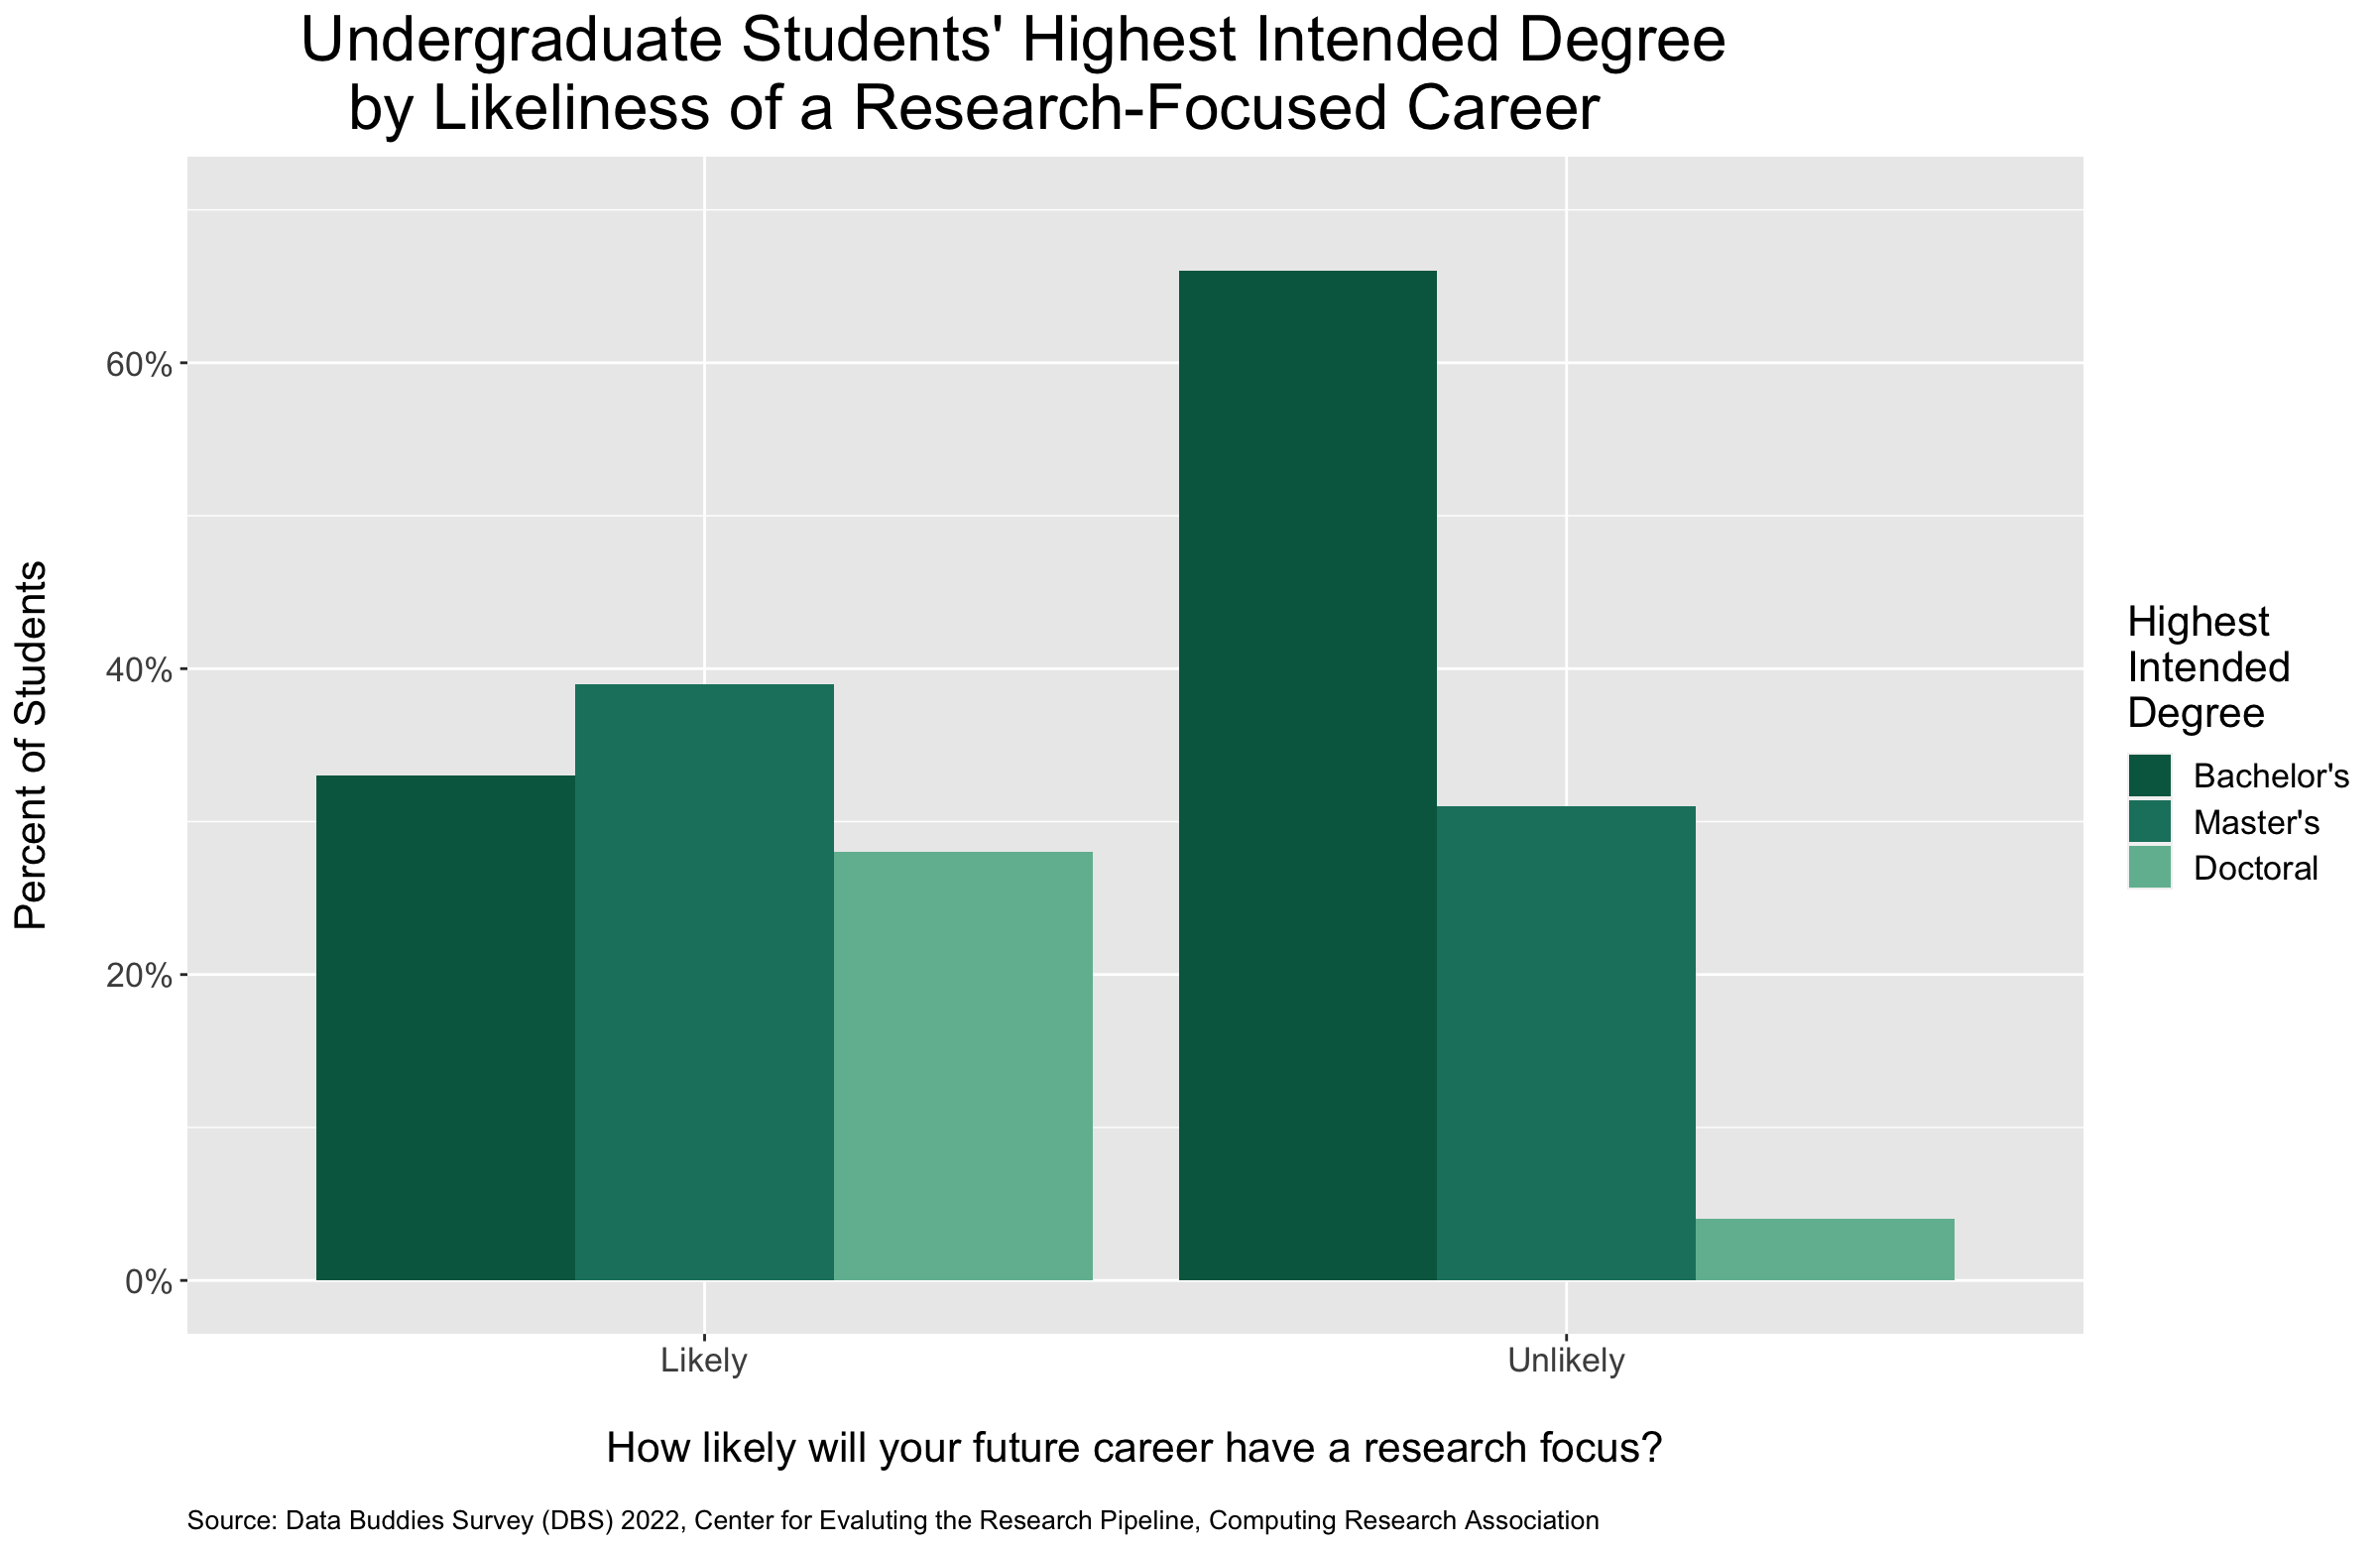 alt="A bar graph showing undergraduate students’ highest intended degree by likeliness of a research-focused career."